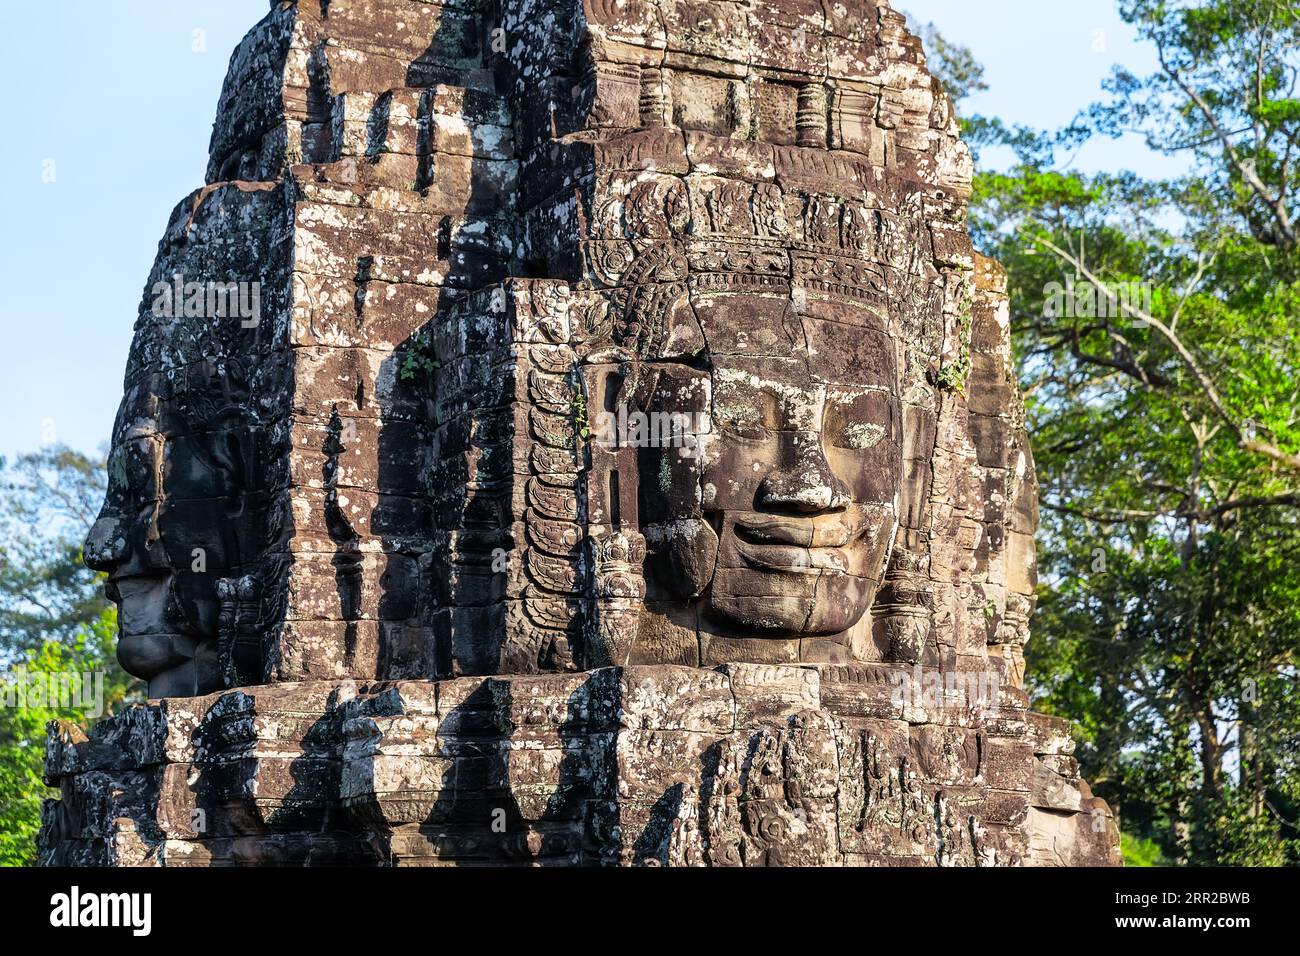 Giant stone faces of ancient Bayon temple. The stone faces of the khmer king on the wall of Bayon Temple, Angkor Thom, Siem Reap, Cambodia. Stock Photo